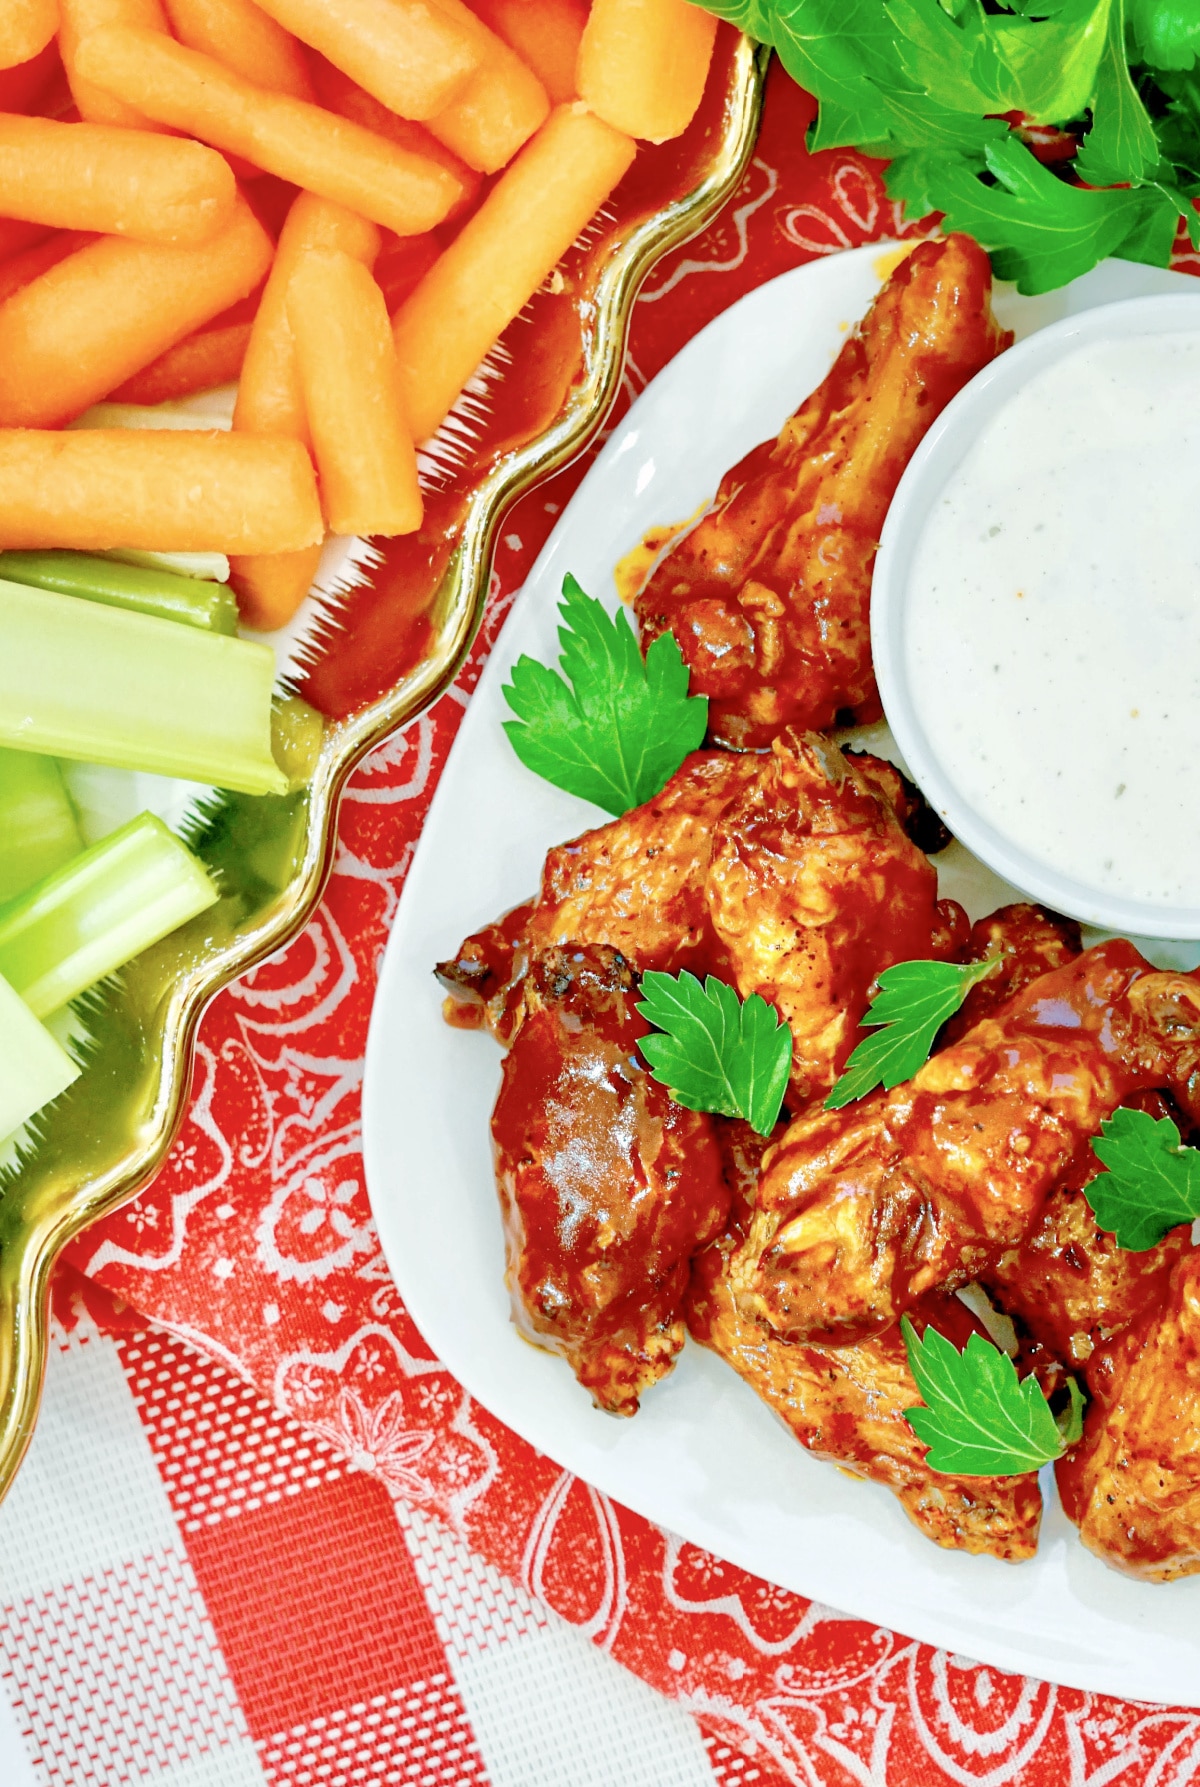 hot wings on a plate with carrots and celery on another plate and a bowl of dipping sauce